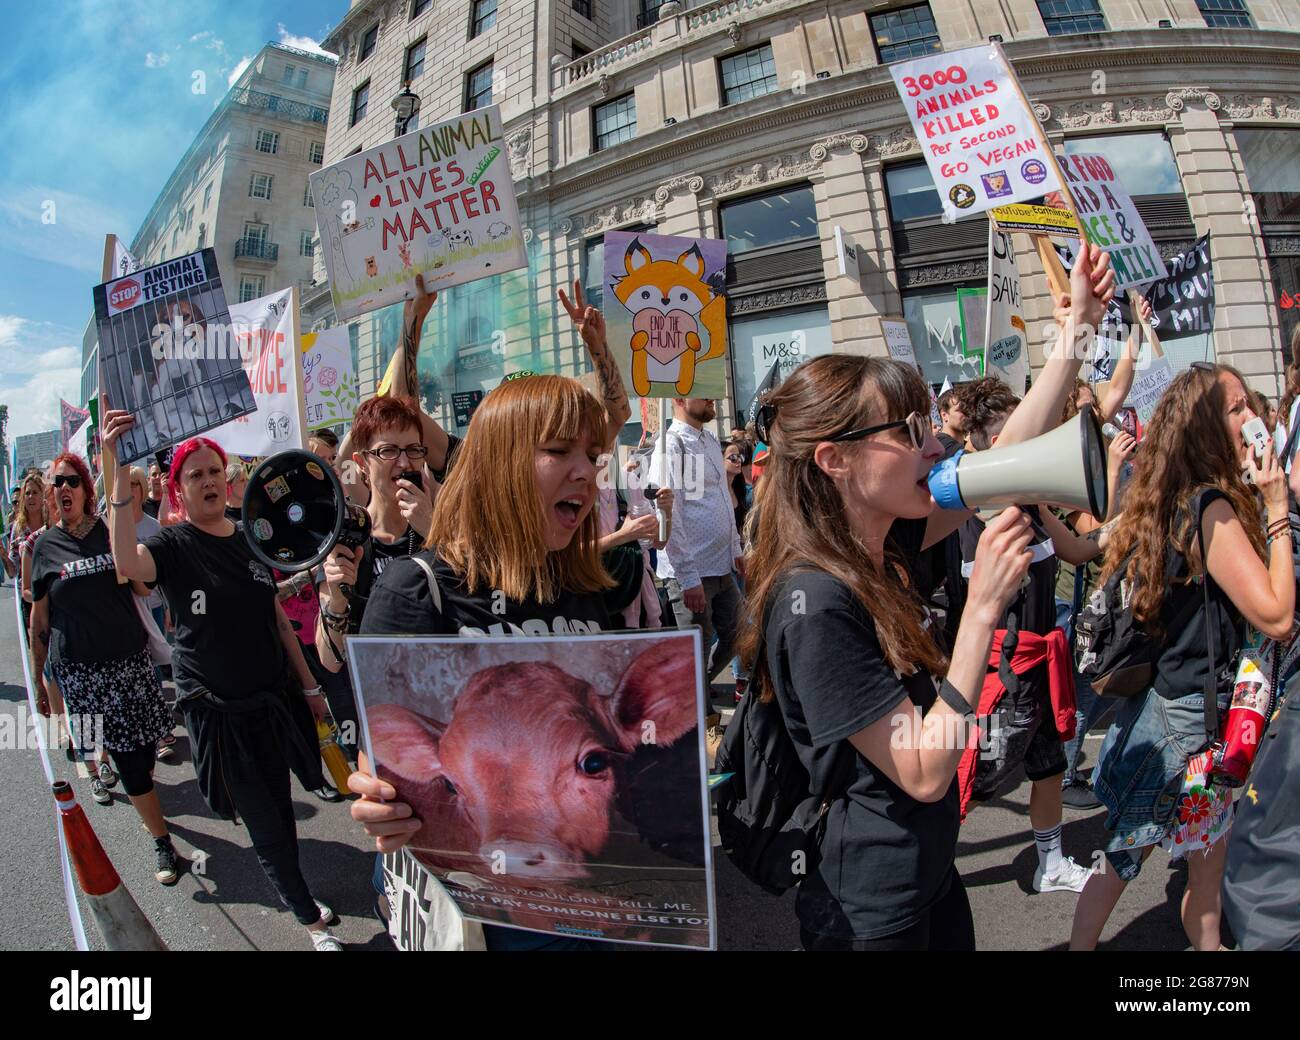 The Official Animal Rights March London 2019.  Activists marching through UK’s capital city on 17th August 2019 Stock Photo